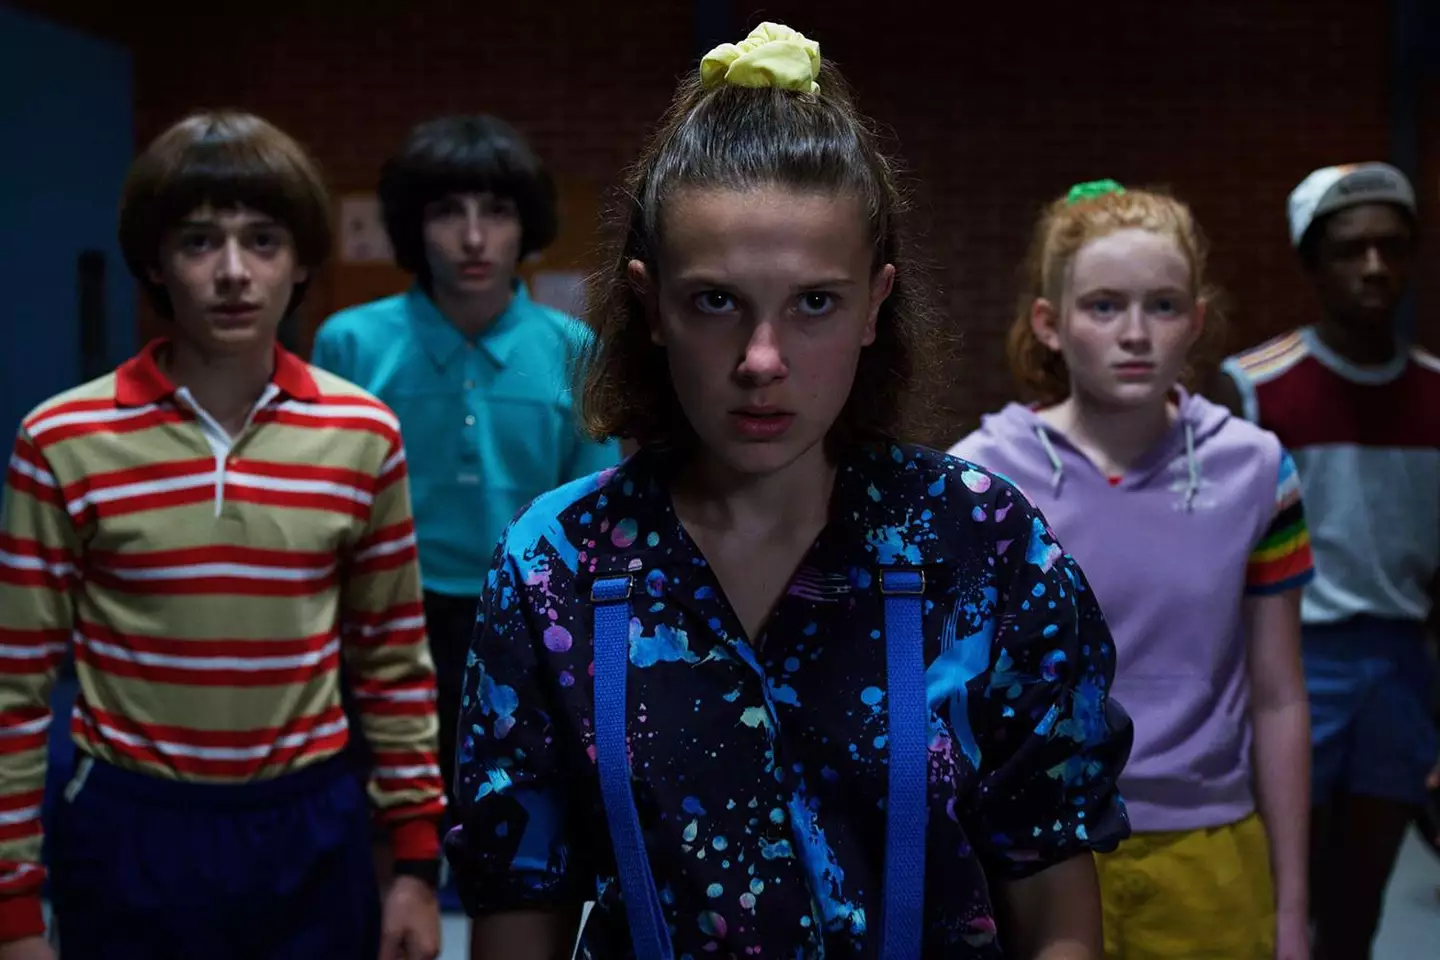 Stranger Things is due to bow out with a fifth and final season - but when?